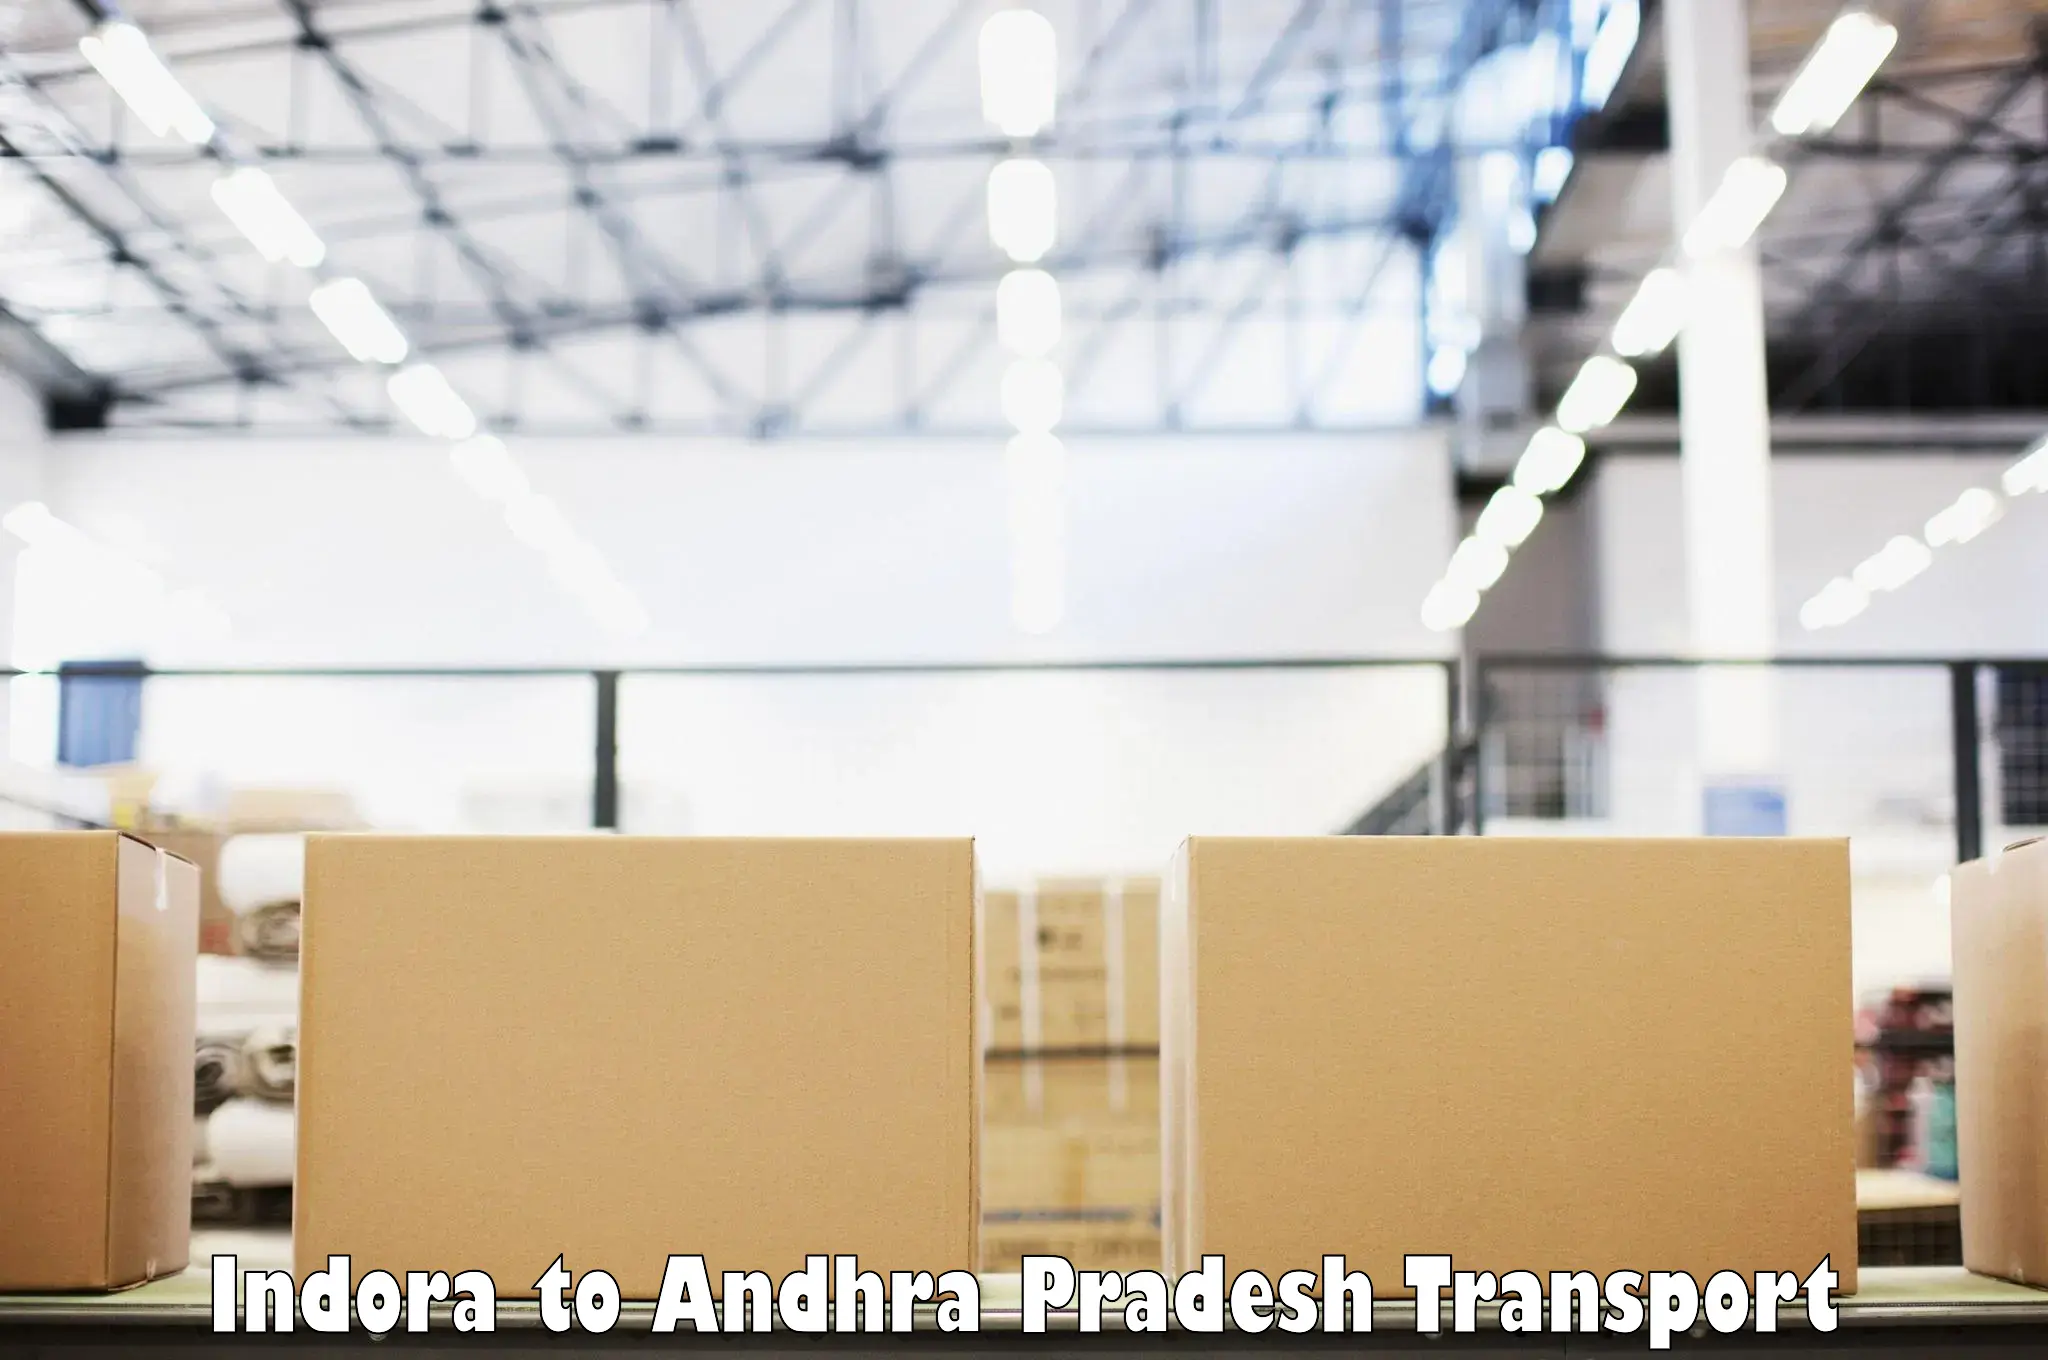 Daily parcel service transport Indora to Gollaprollu